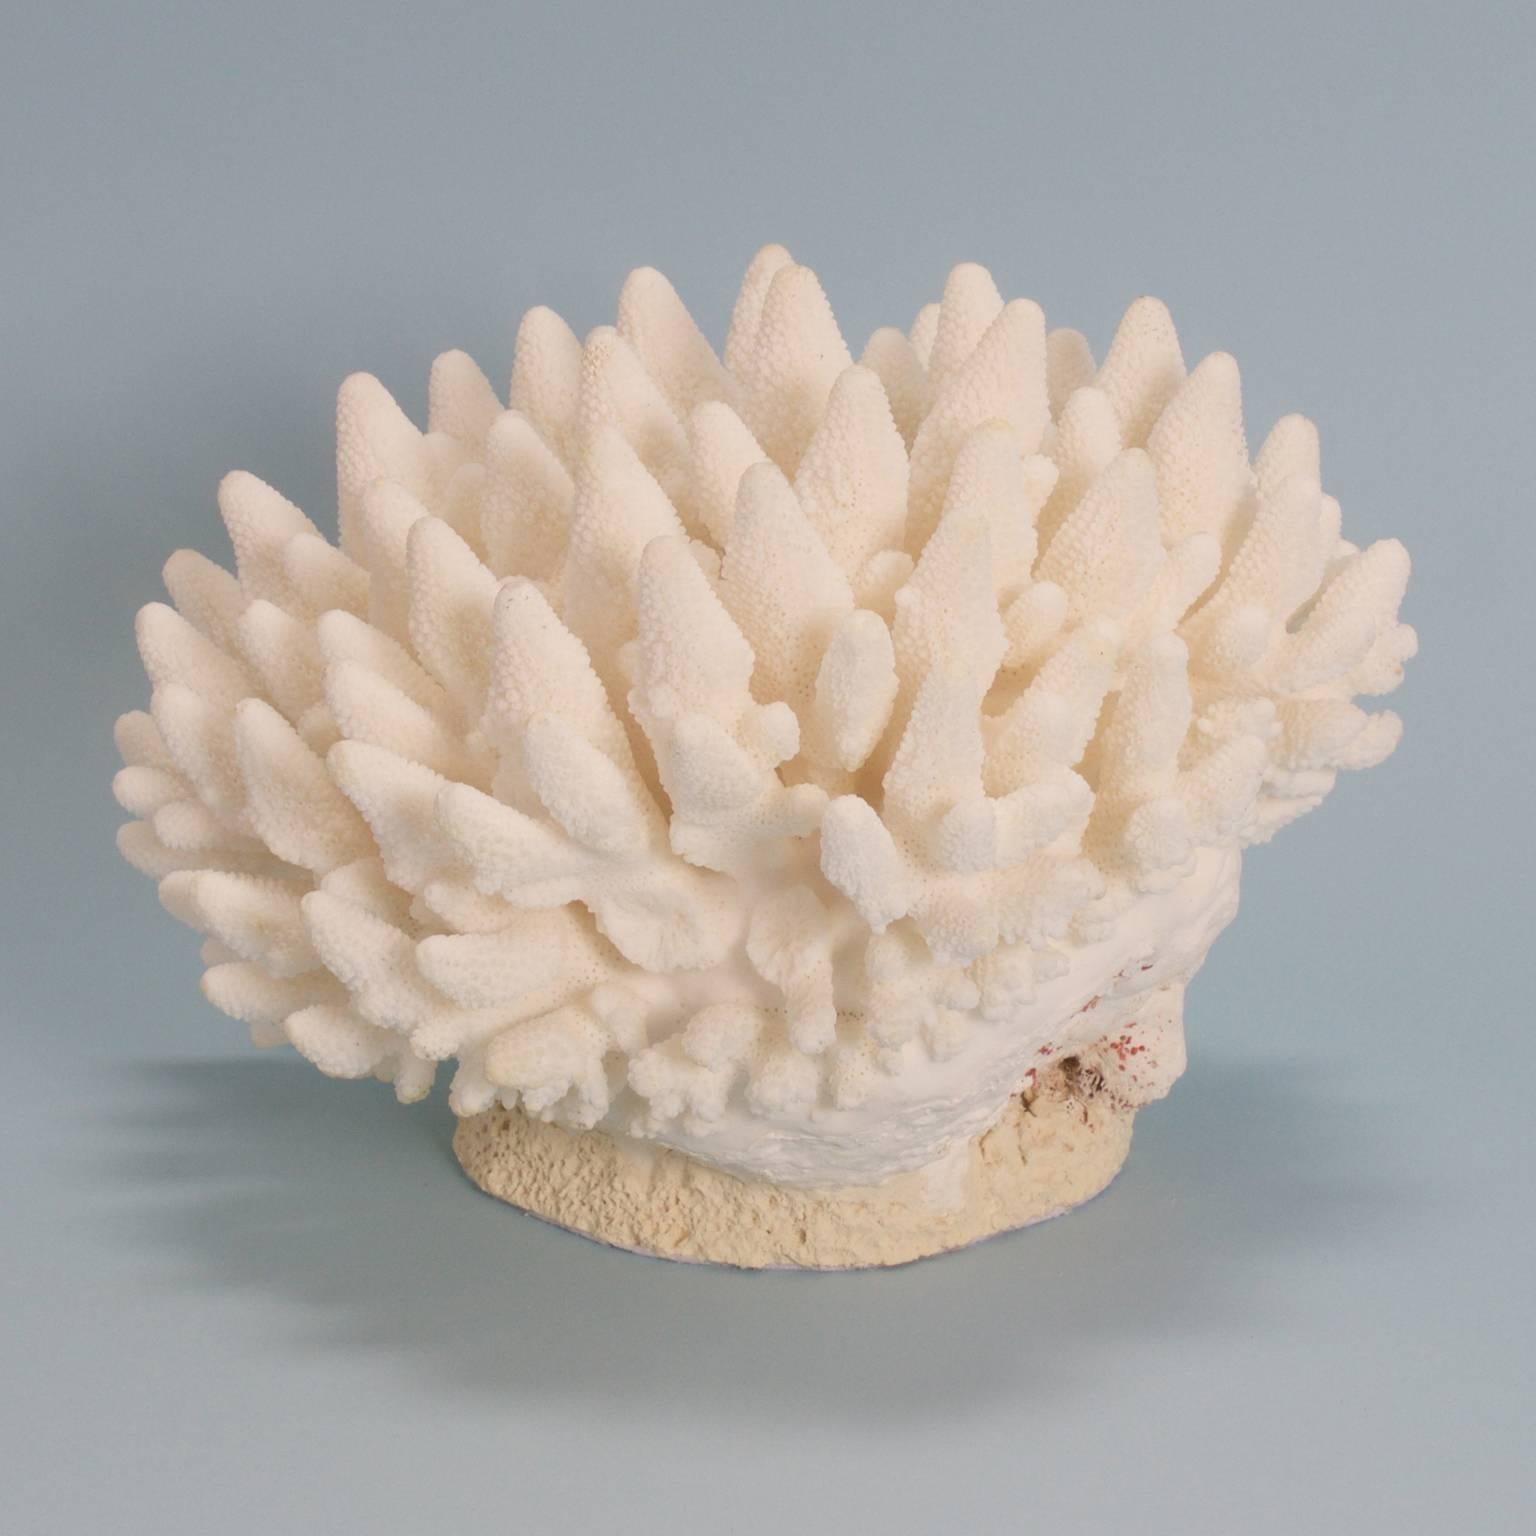 Designed and crafted by F.S. Henemader, this finger coral sculpture has an inviting organic color and form. Enhance any style interior with this authentic coral gift from Mother Nature.

This piece cannot be shipped out of the US, without